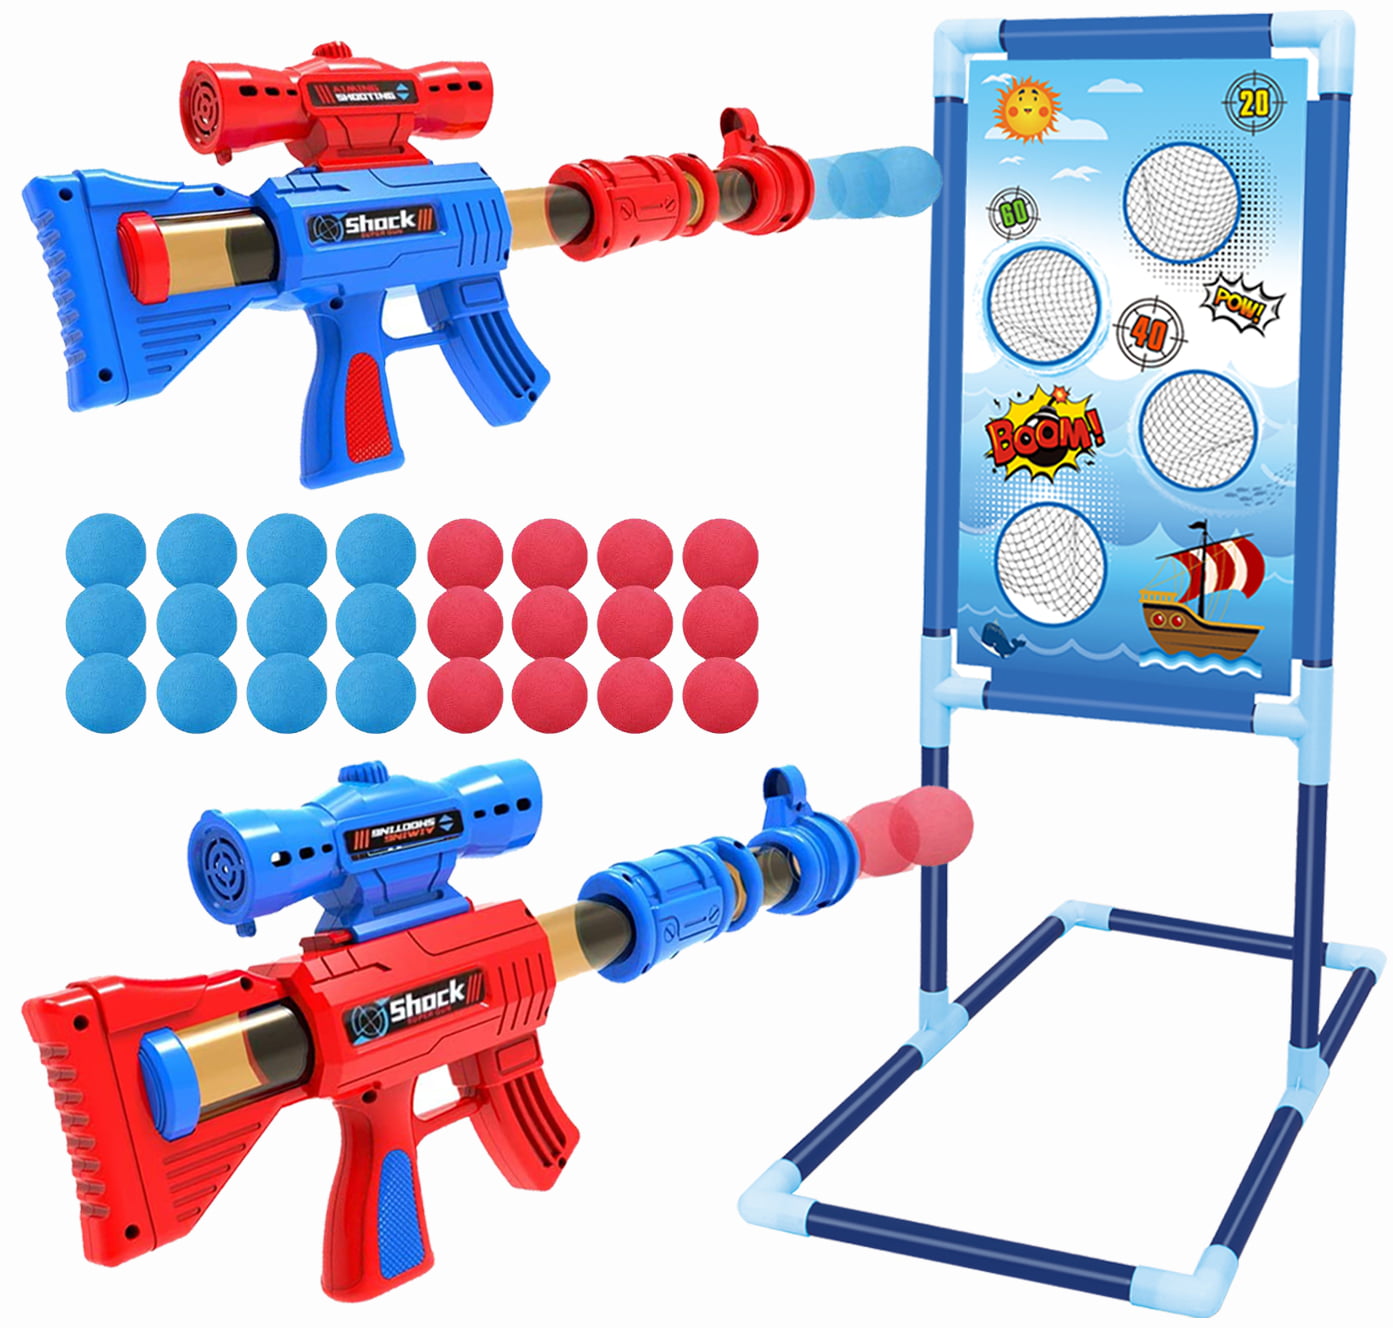 with Shooting Target Stand 2 Popper Air Guns 48 Foam Balls Indoor Outdoor Practice Set Toy Guns Gift for Boys Girls G.C Dinosaur Shooting Game Toys for Kids 5 6 7 8 9 10 